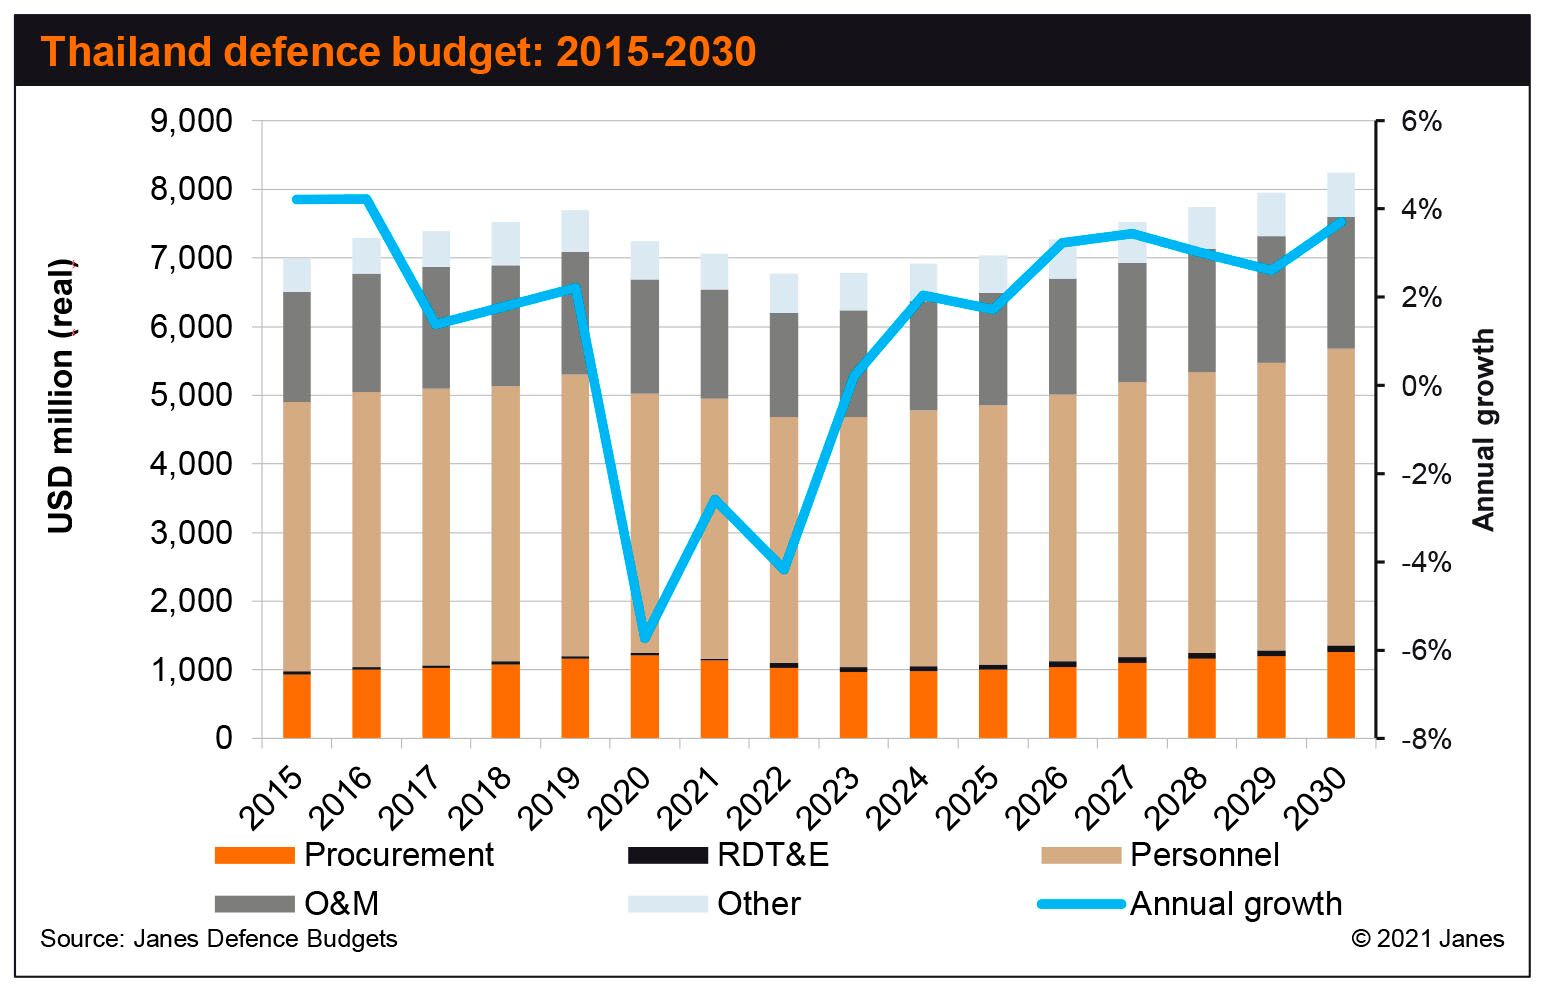 Janes Defence Budgets forecasts that Thailand's military expenditure will grow strongly from around 2023. (Janes Defence Budgets)